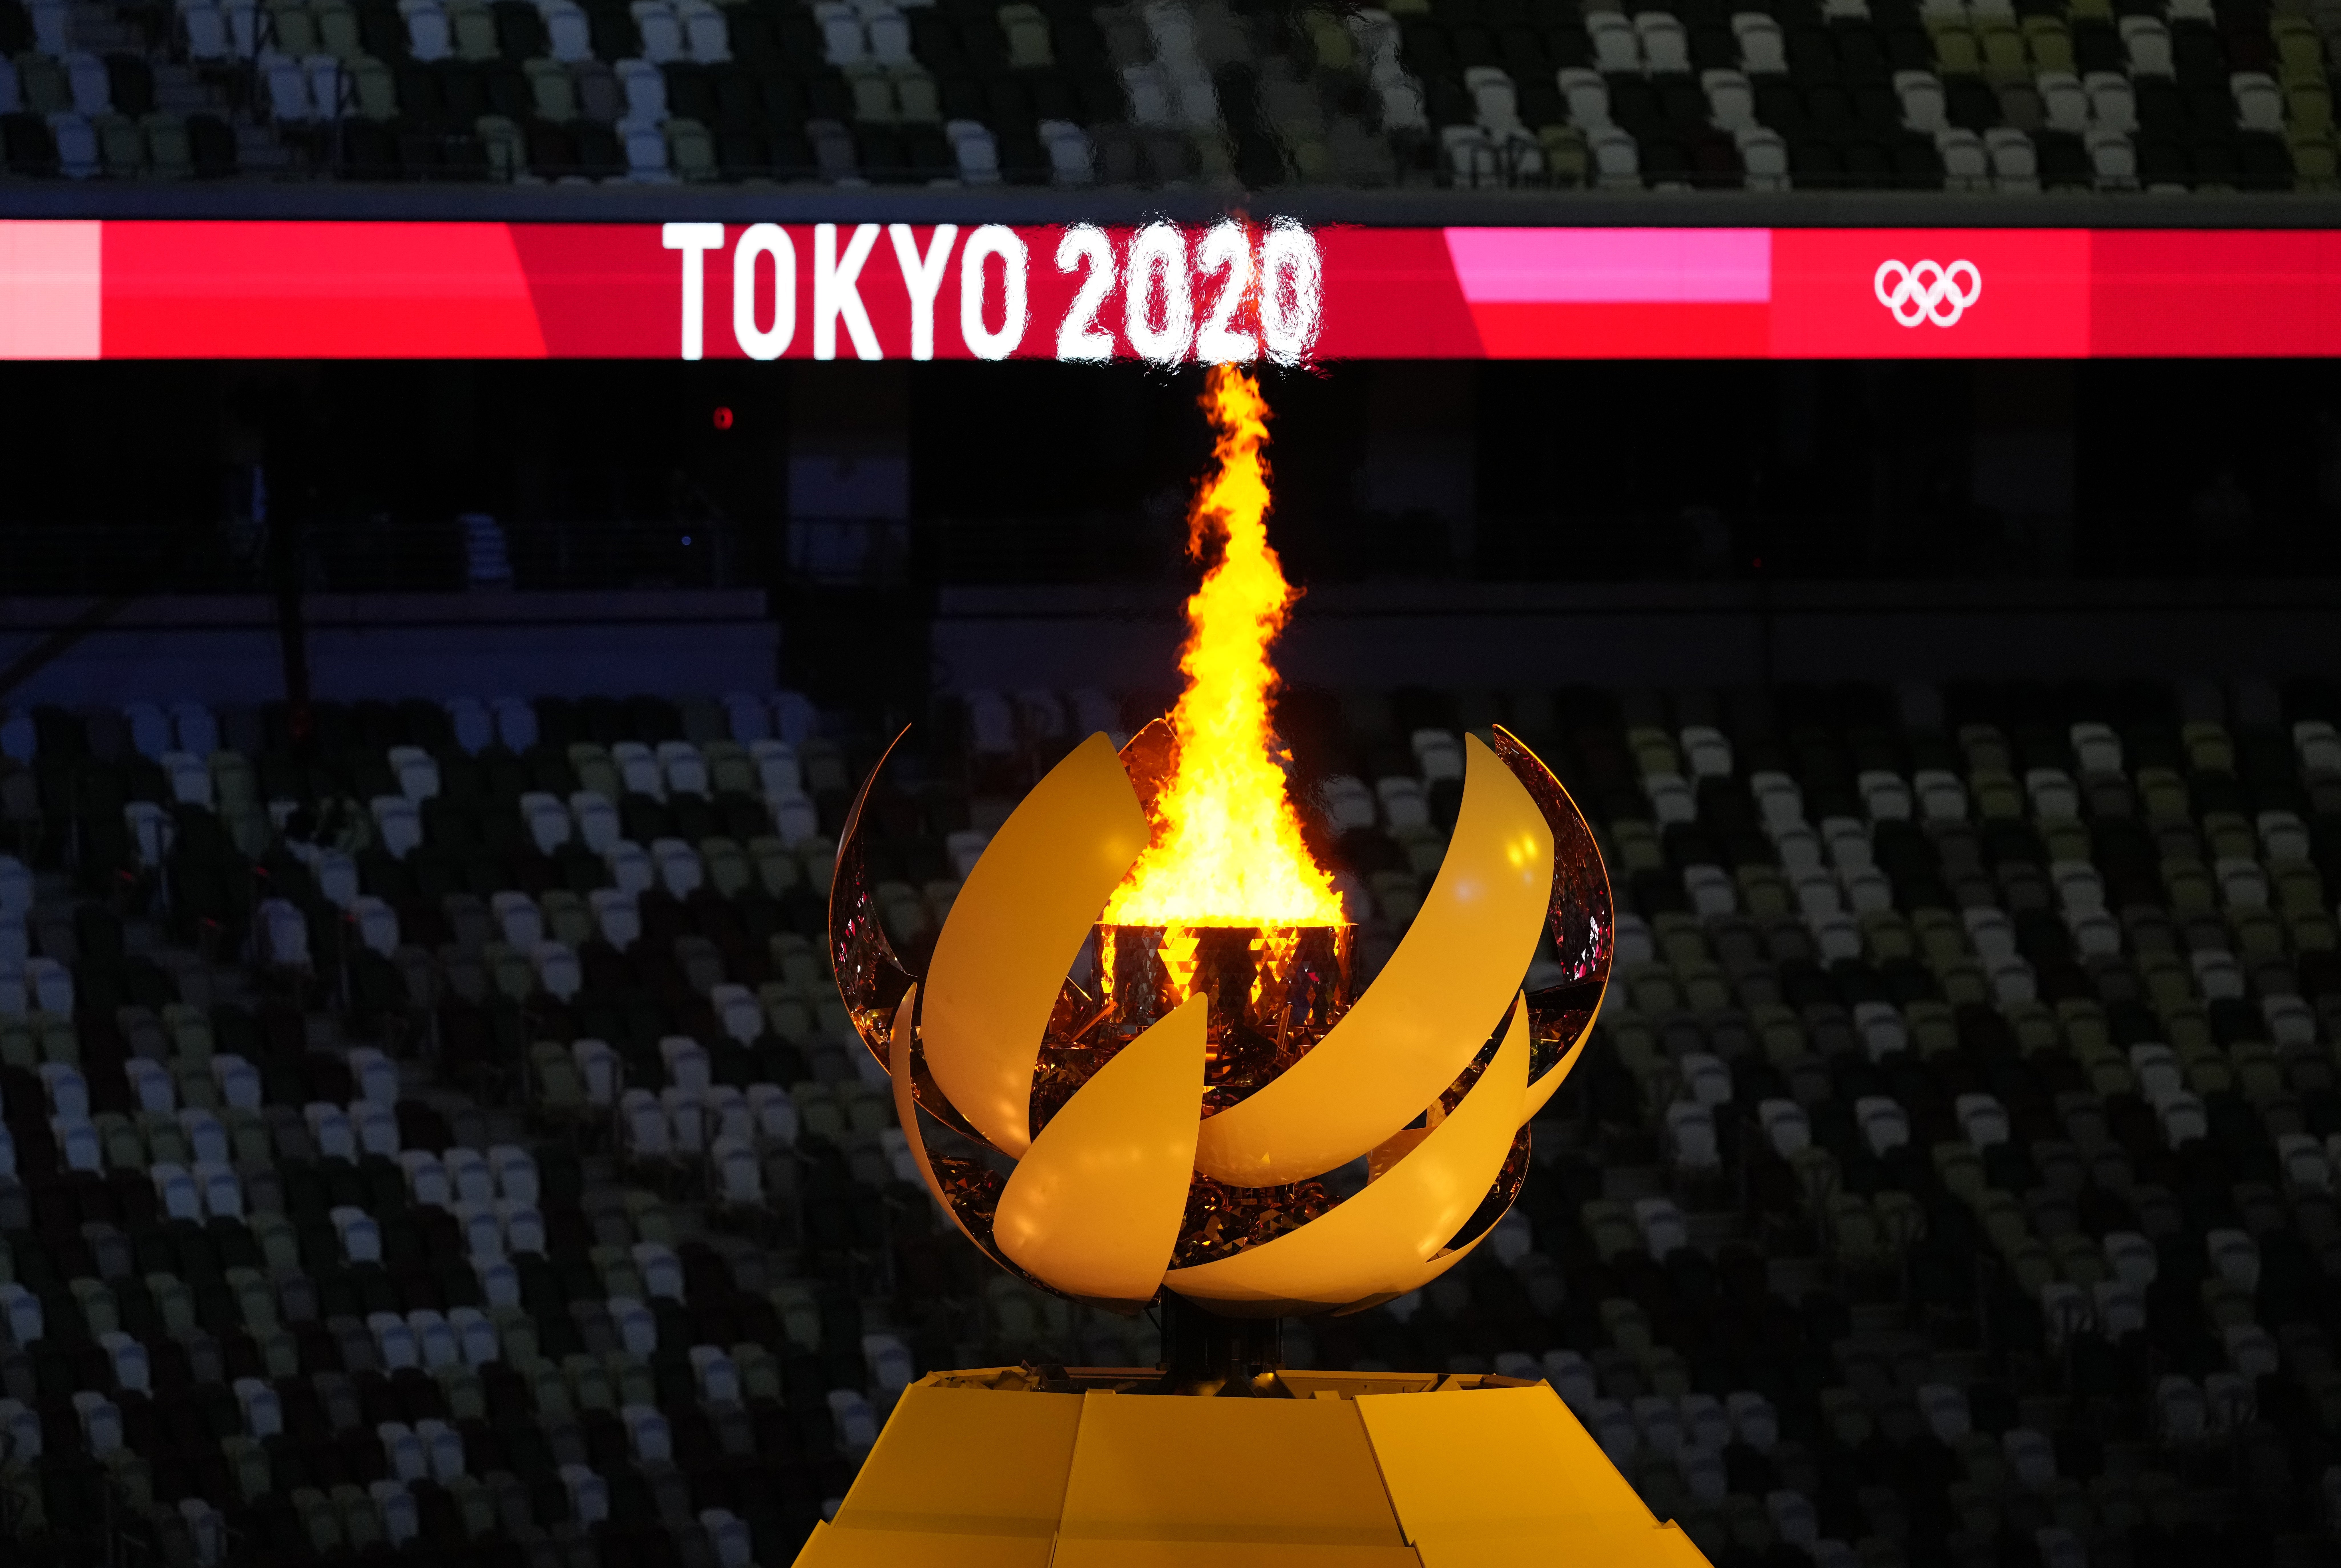 A view of the Olympic flame during the opening ceremony of the Tokyo 2020 Olympic Games (Martin Rickett/PA Images)